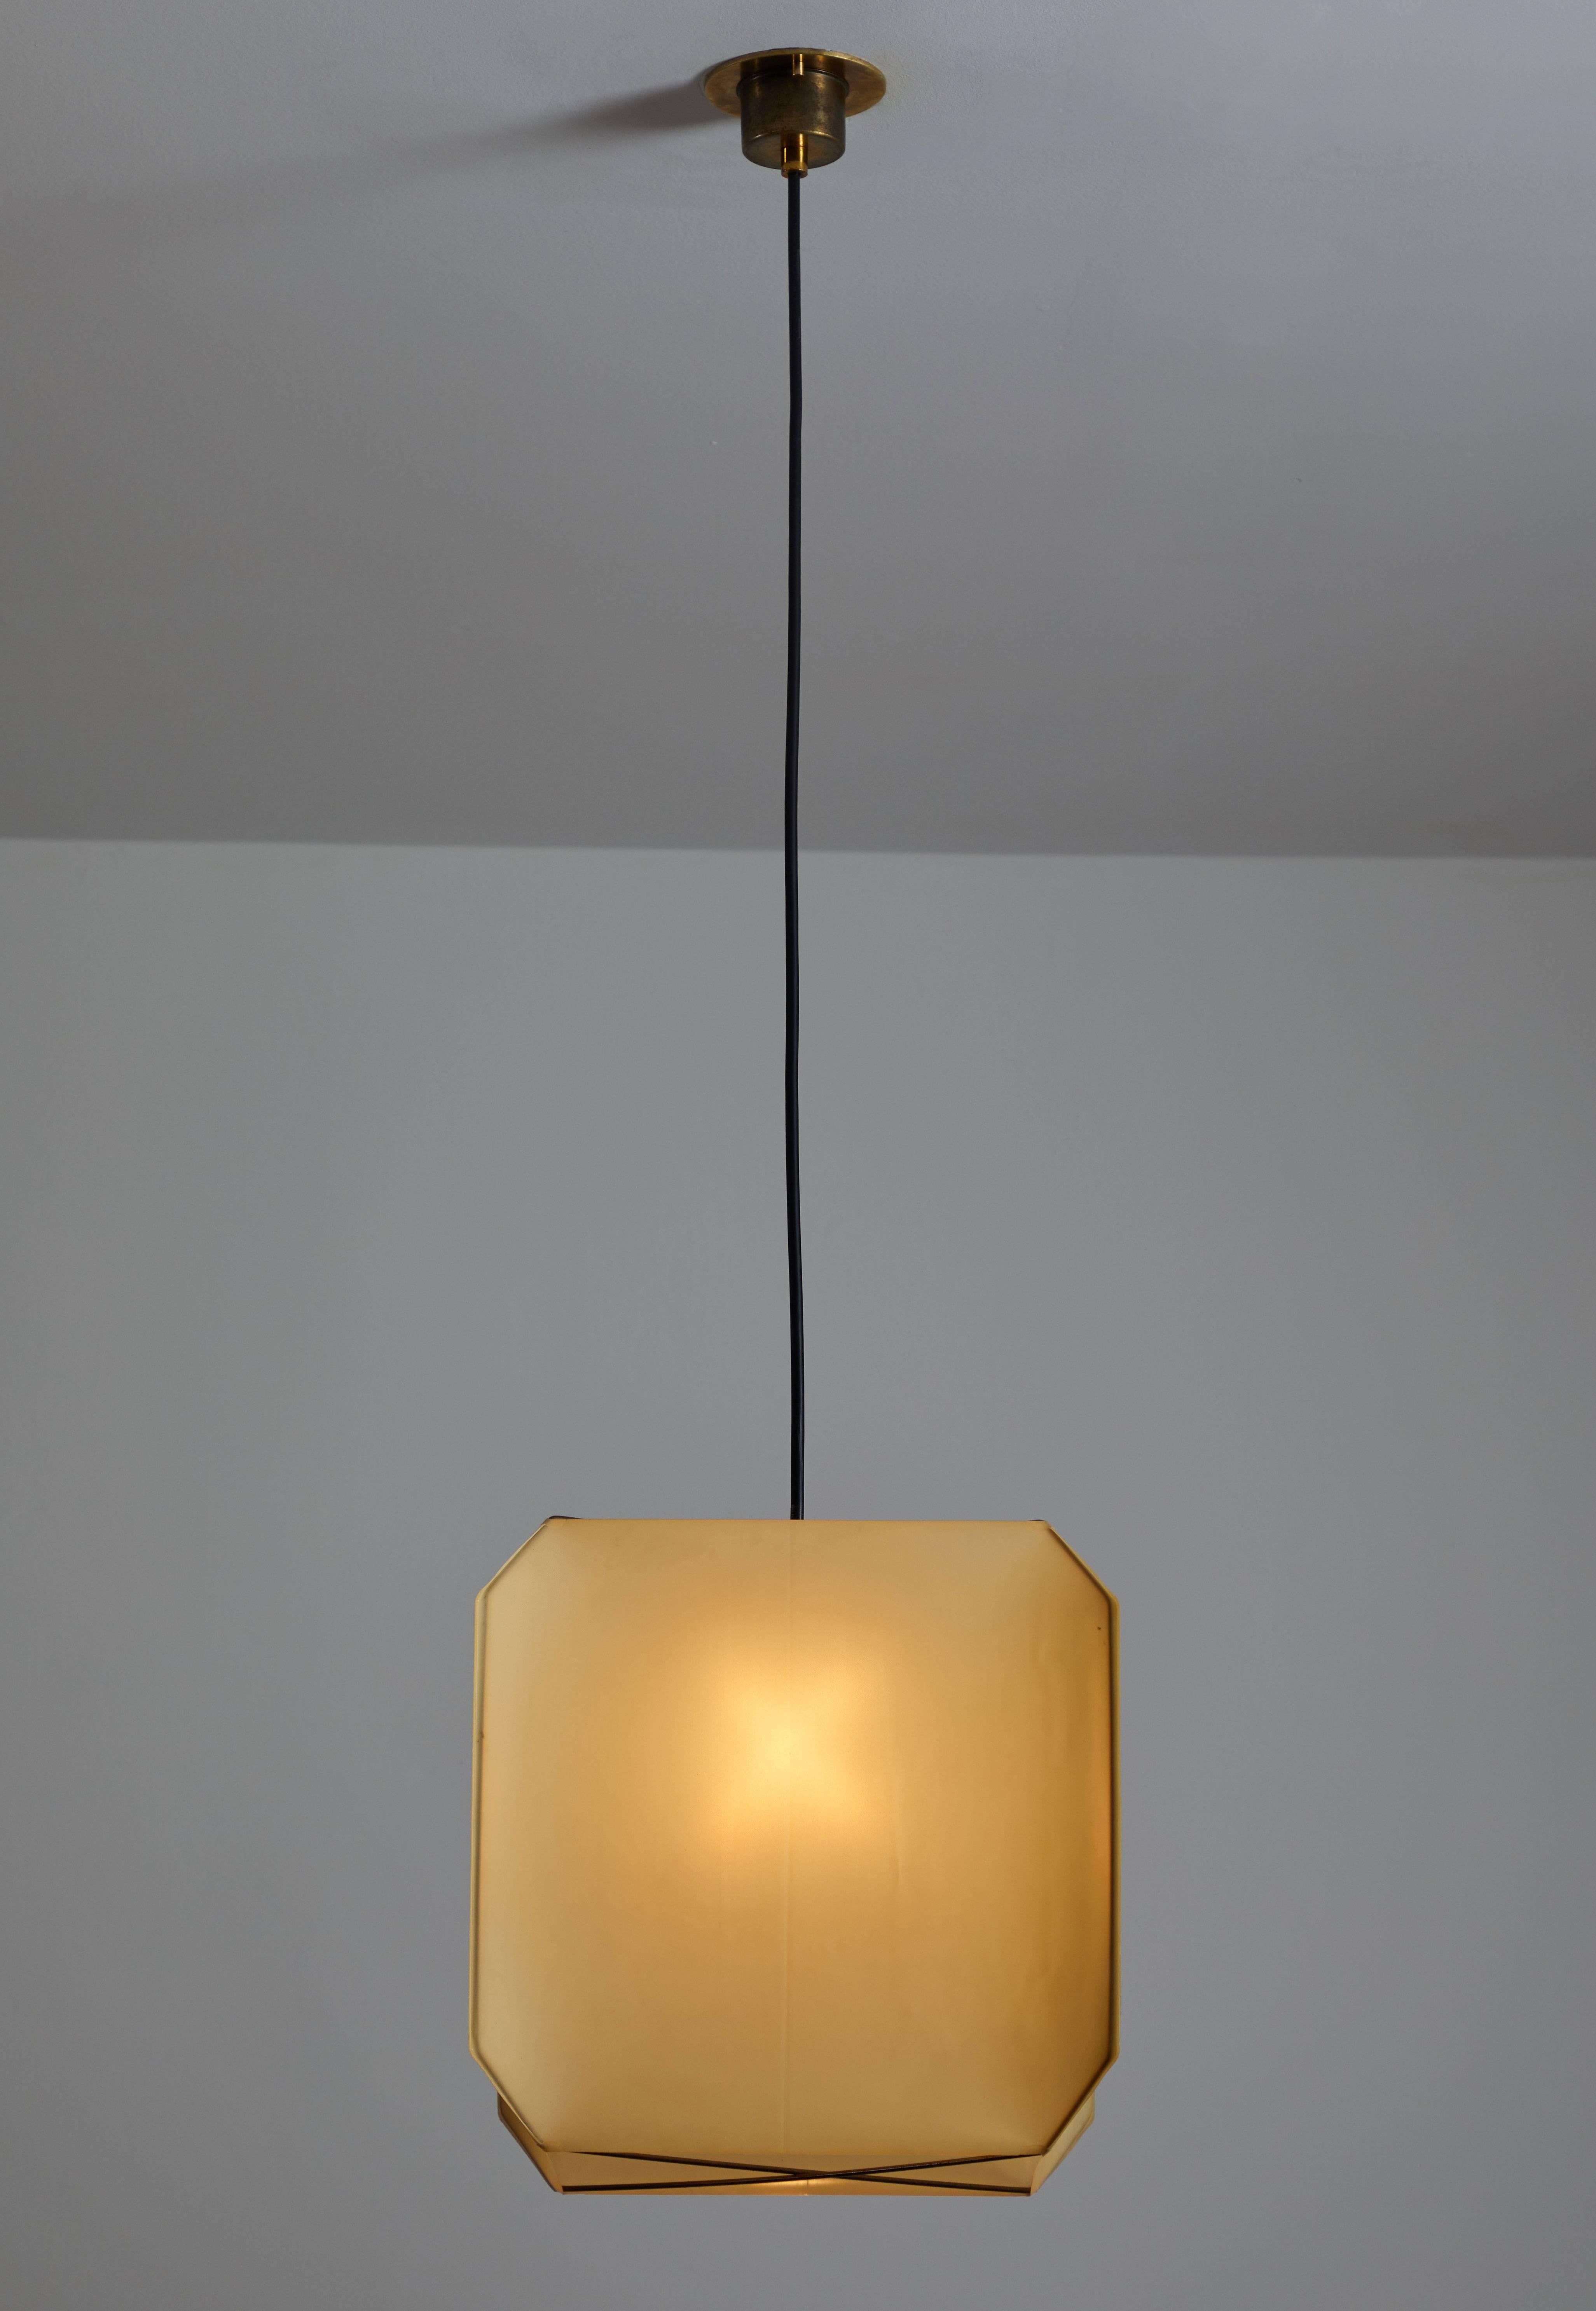 Bali Suspension Light by Bruno Munari for Danese Milano. Designed in Italy 1958. Brass, silk and acrylic. Wired for US junction boxes. Takes one Edison 40w maximum bulb. Literature: Danese Milano product catalog 1976, p. 27.